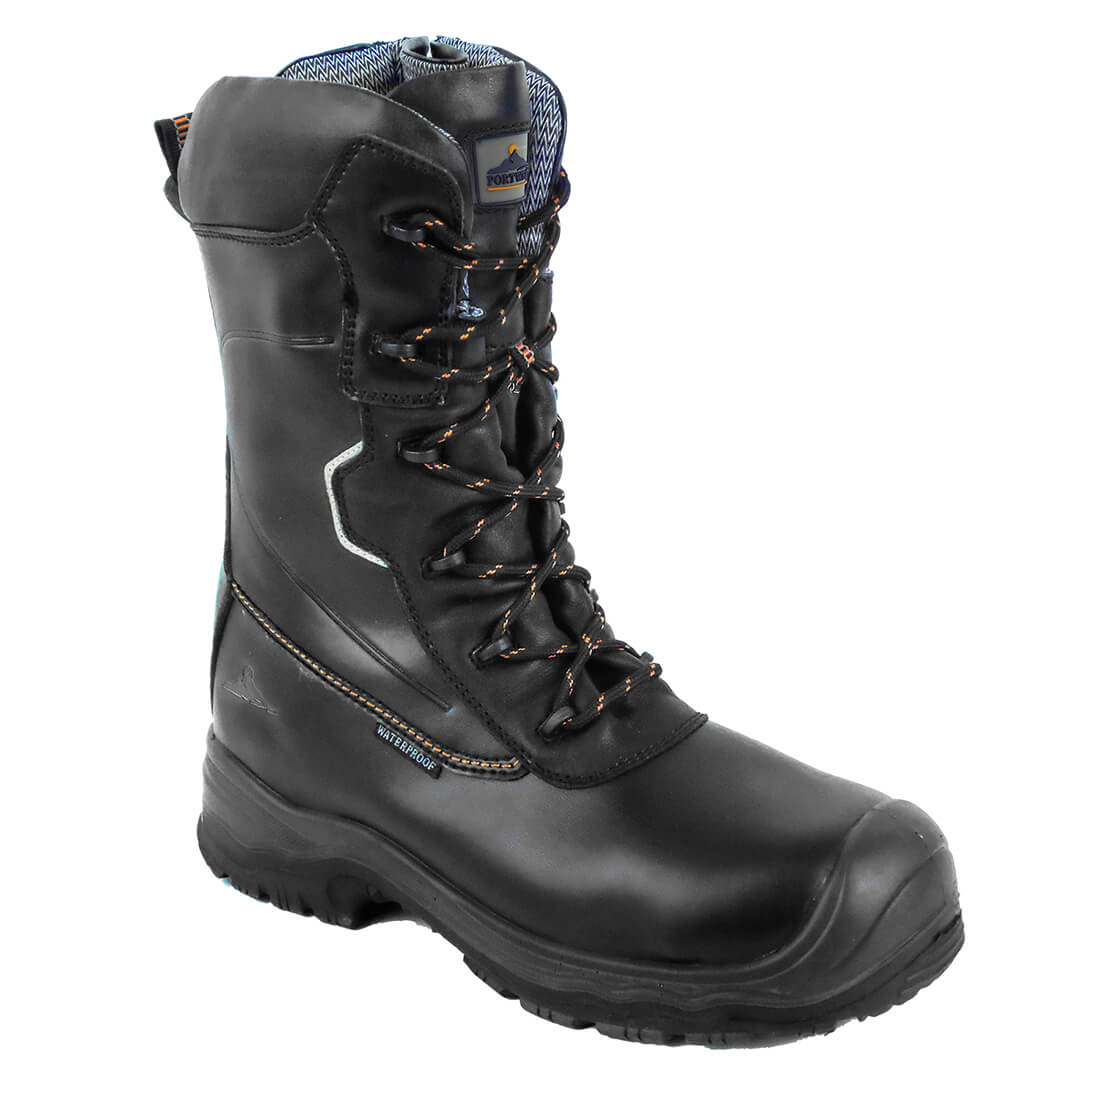 Image of Portwest Mens Compositelite Traction Safety Boots Black Size 11